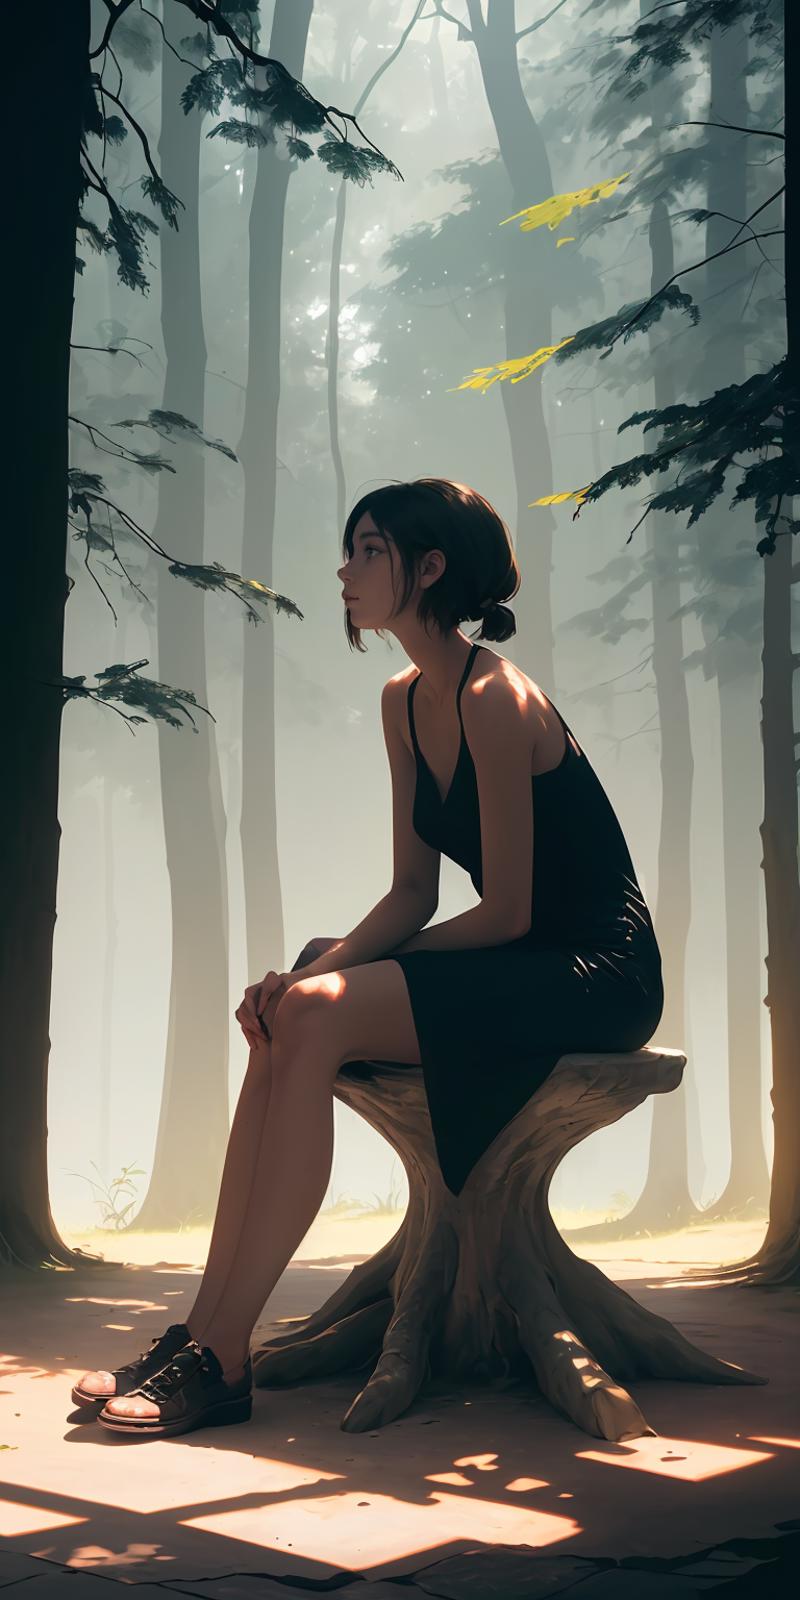 A woman sitting on a tree stump in the woods.